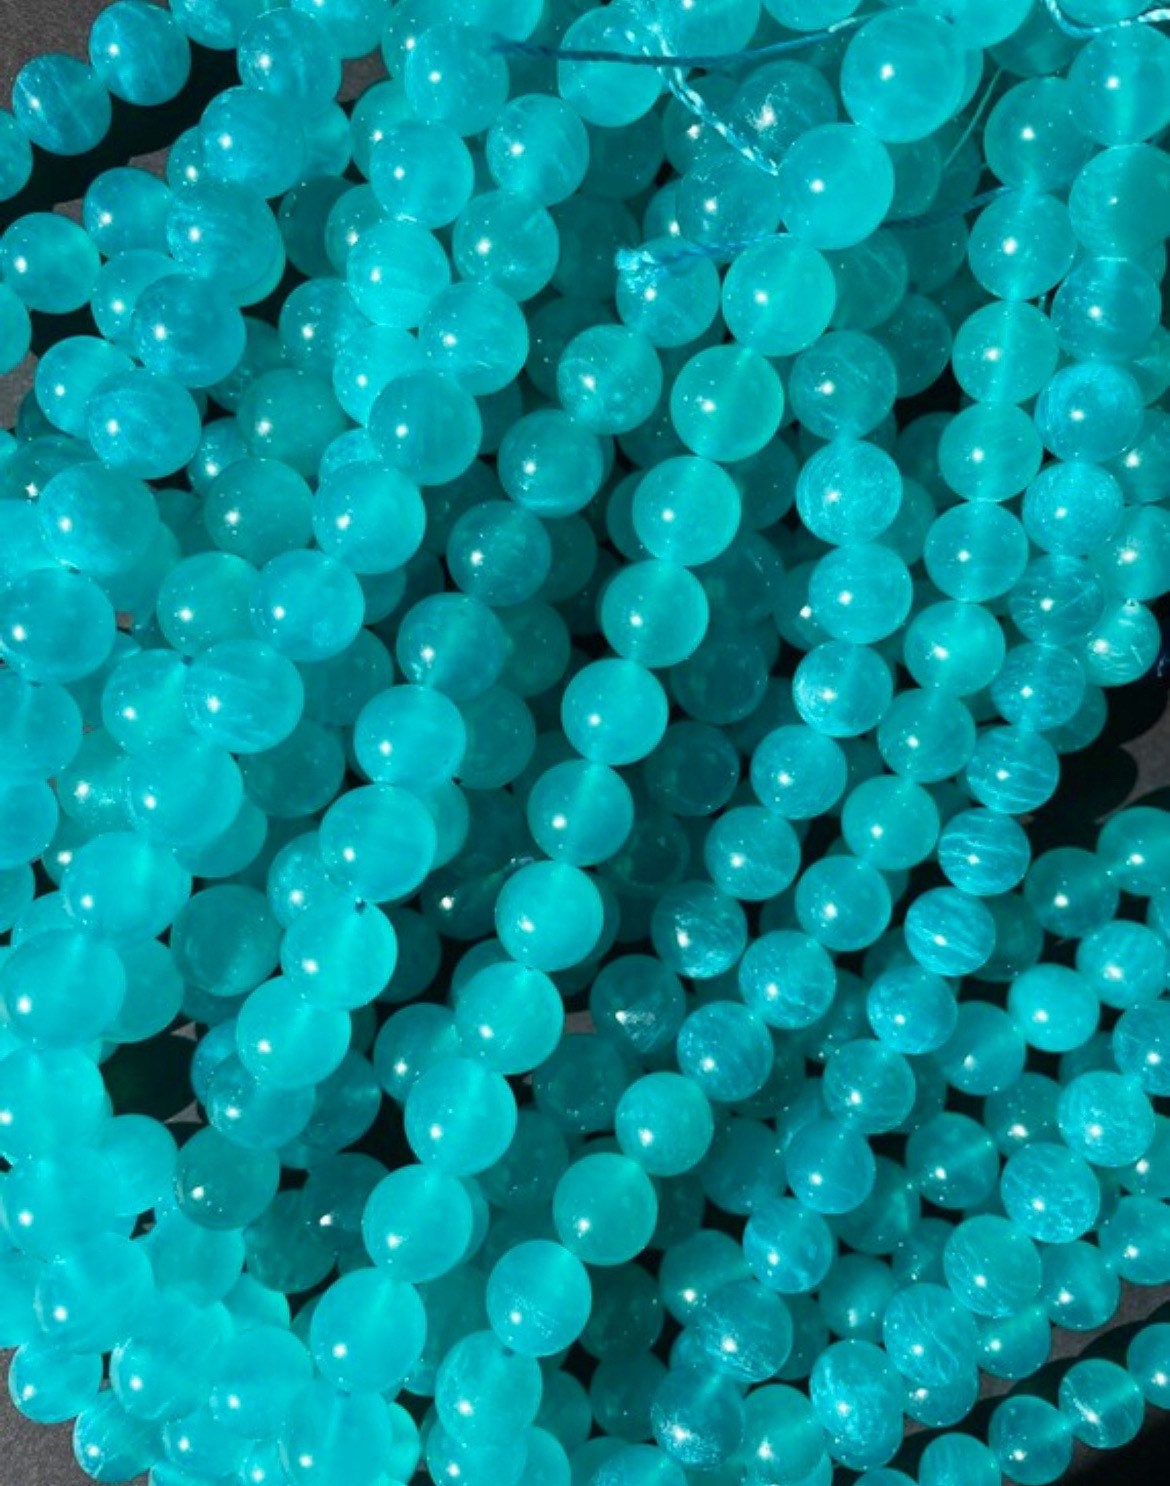 AAA Natural Amazonite - 4mm 6mm 8mm 10mm 12mm Round Bead - Gorgeous Blue Color Amazonite - Great Quality Gemstone Bead 15.5” Strand